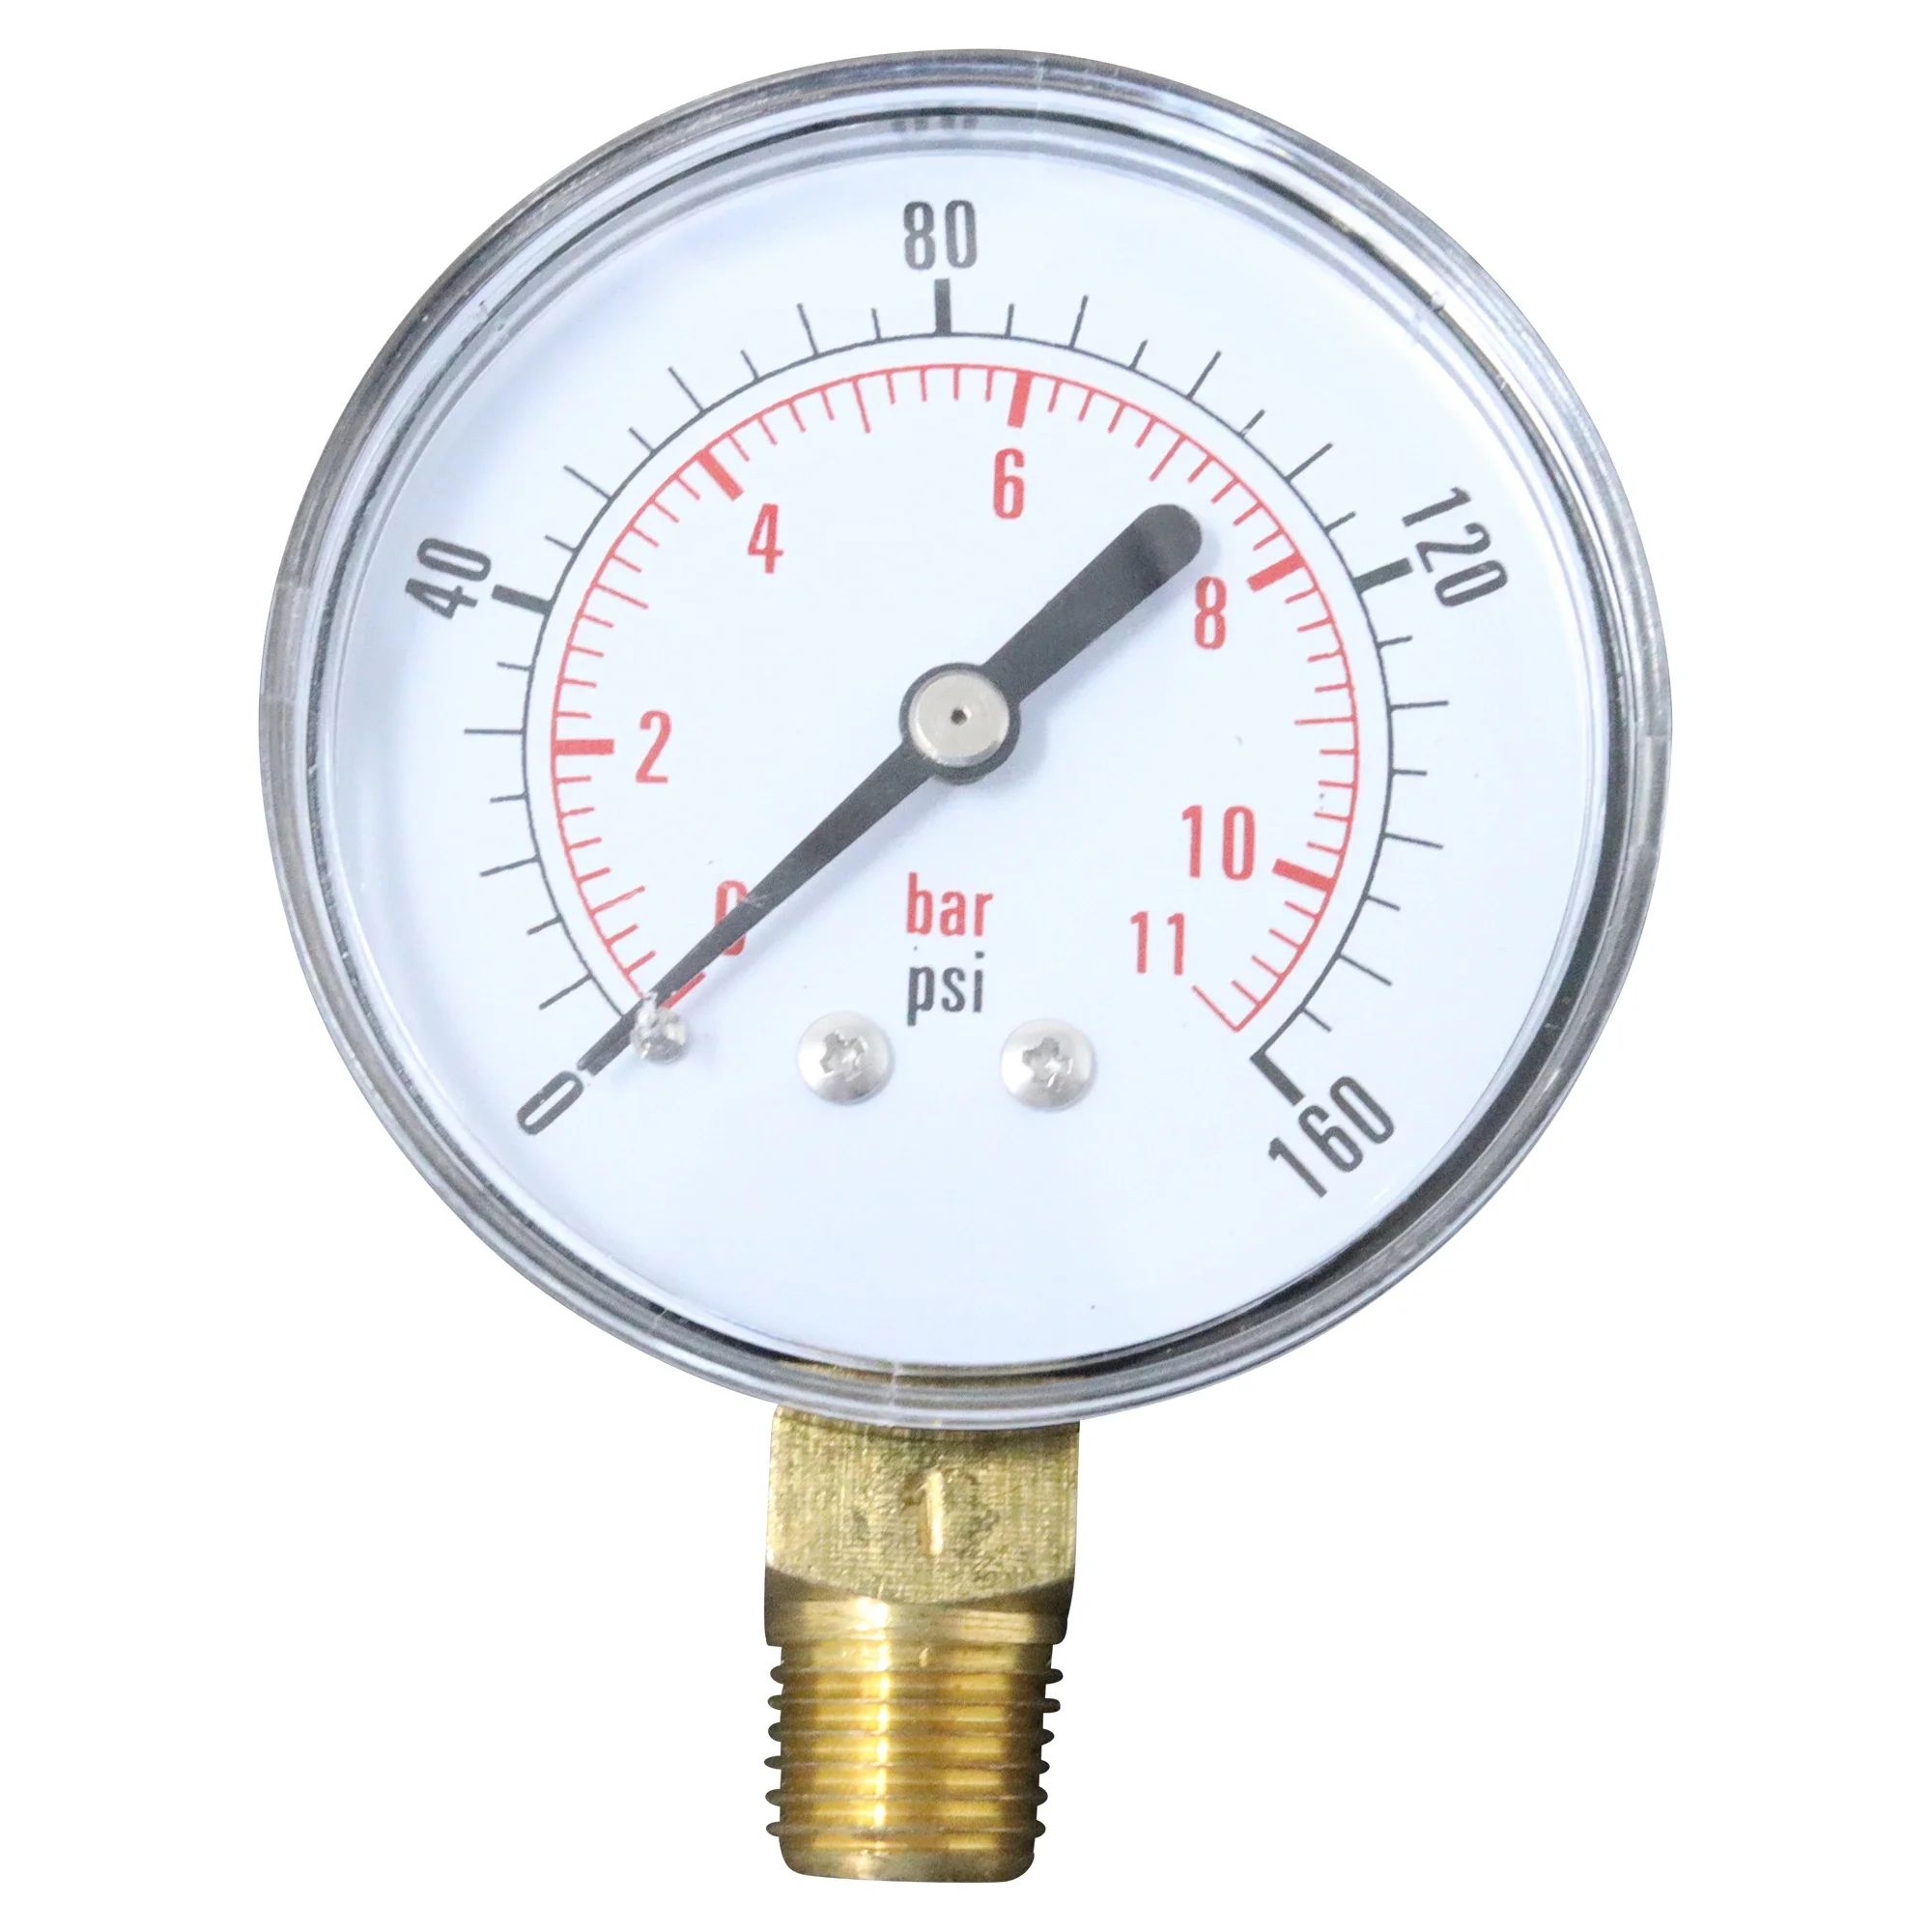 Wastebuilt® Replacement for Cusco Gauge 160 PSI